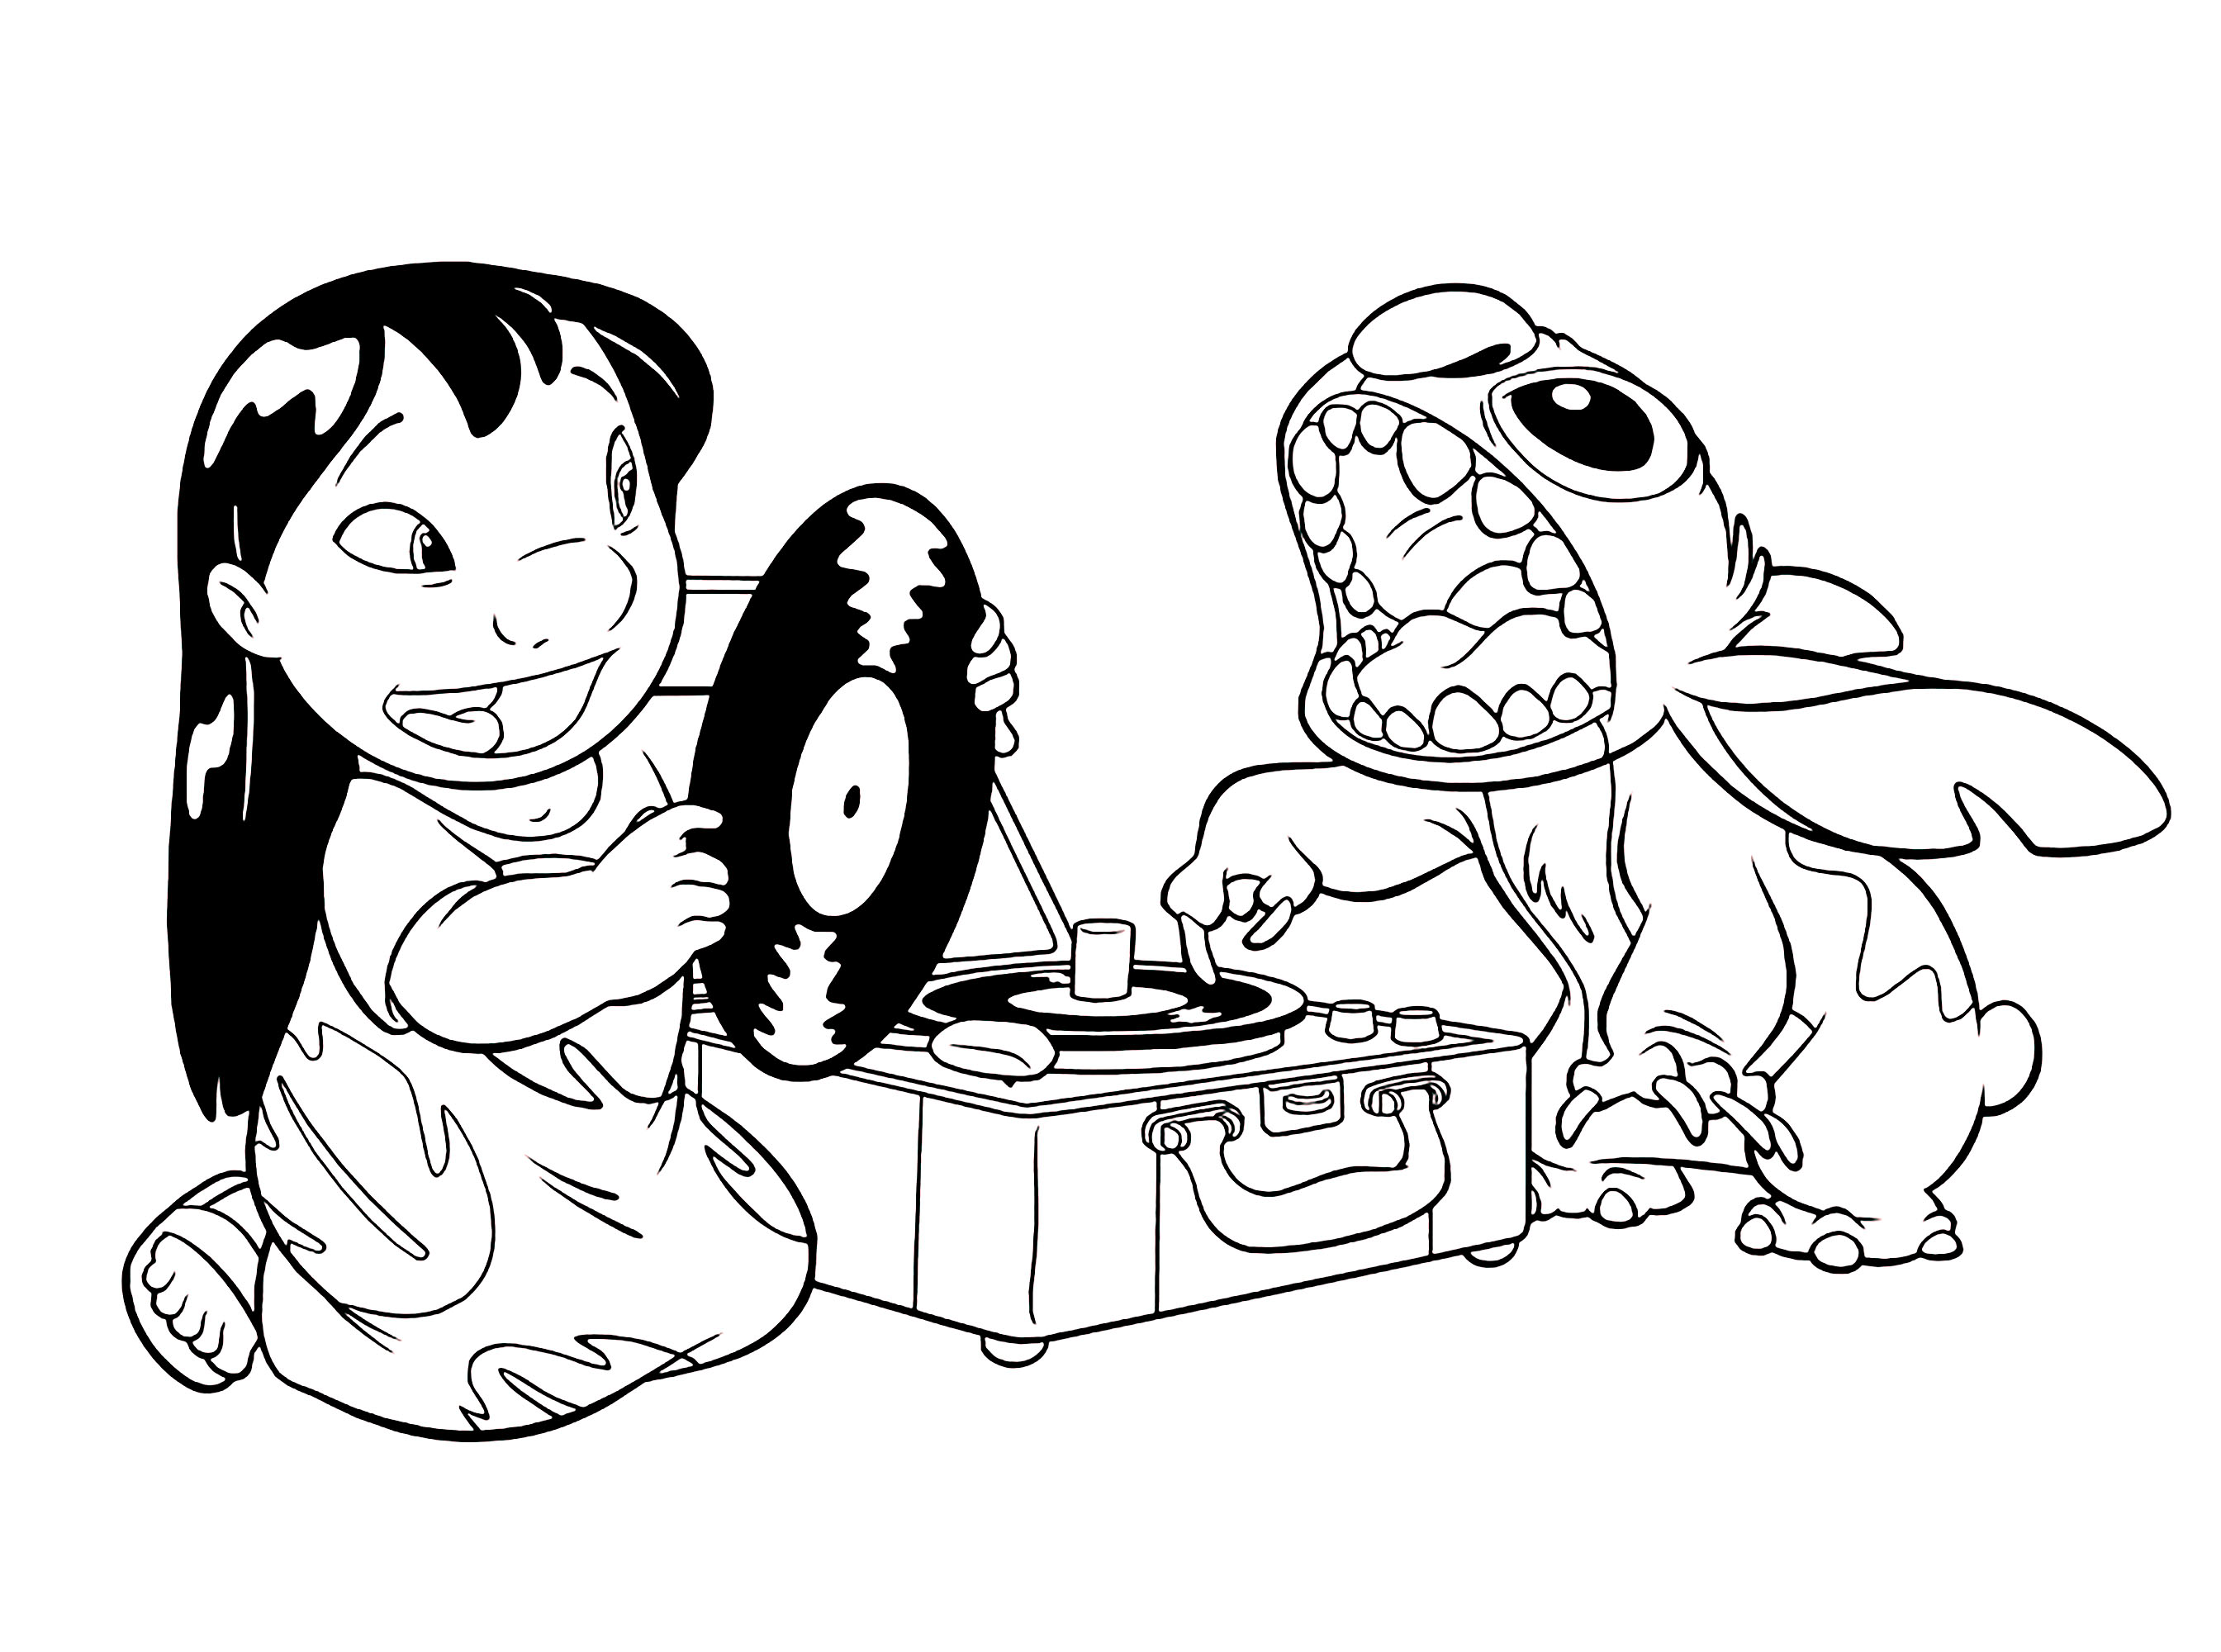 Lilo and Stitch coloring for children - Lilo and Stitch Kids Coloring Pages